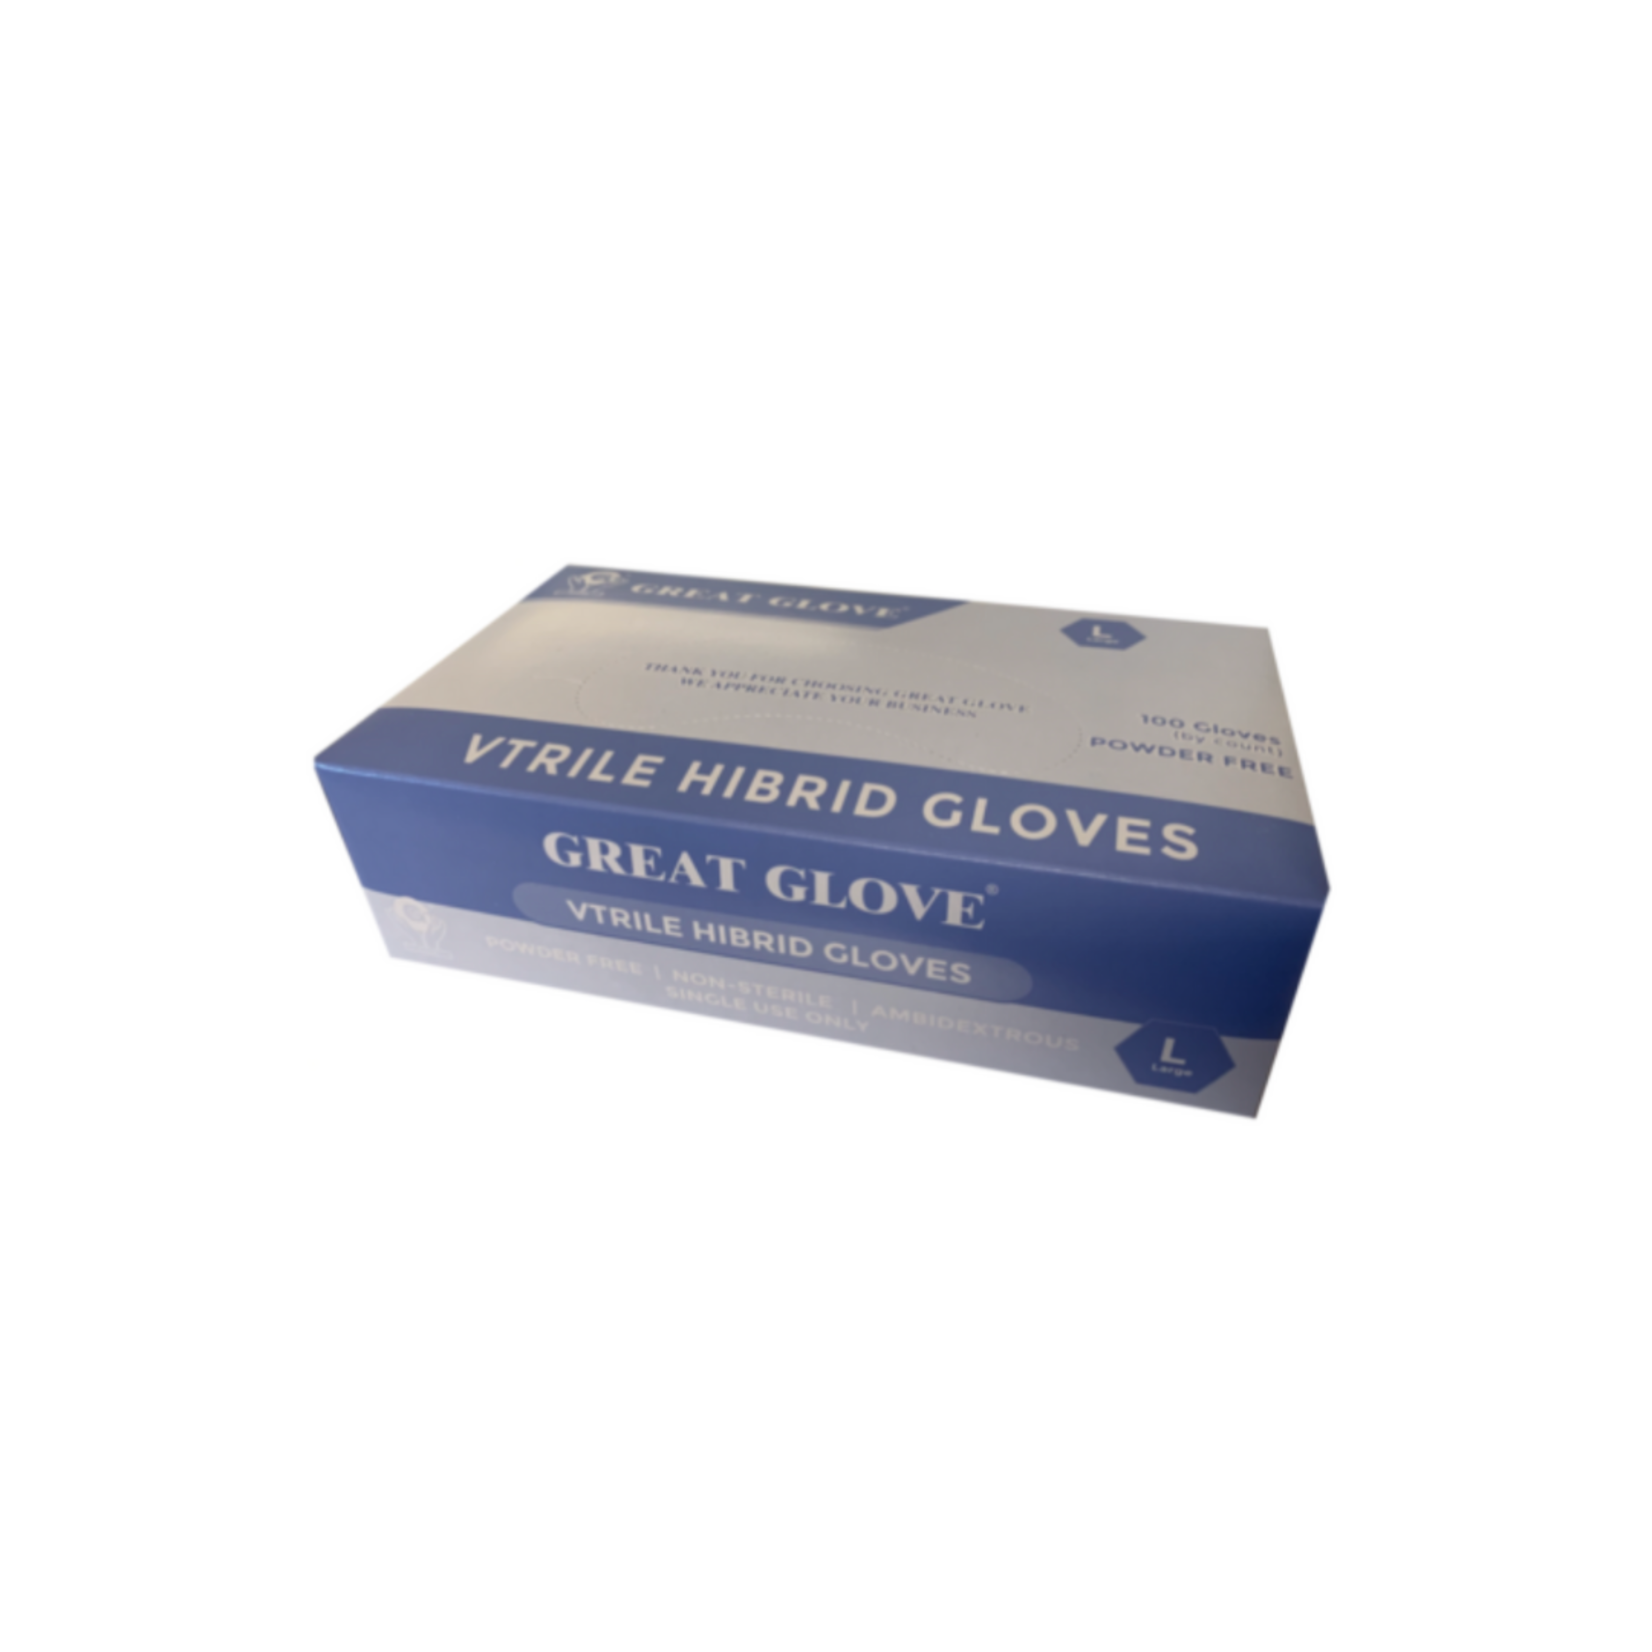 Great Glove Great Glove - Vtrile hibrid Gloves - XL (100 Count)